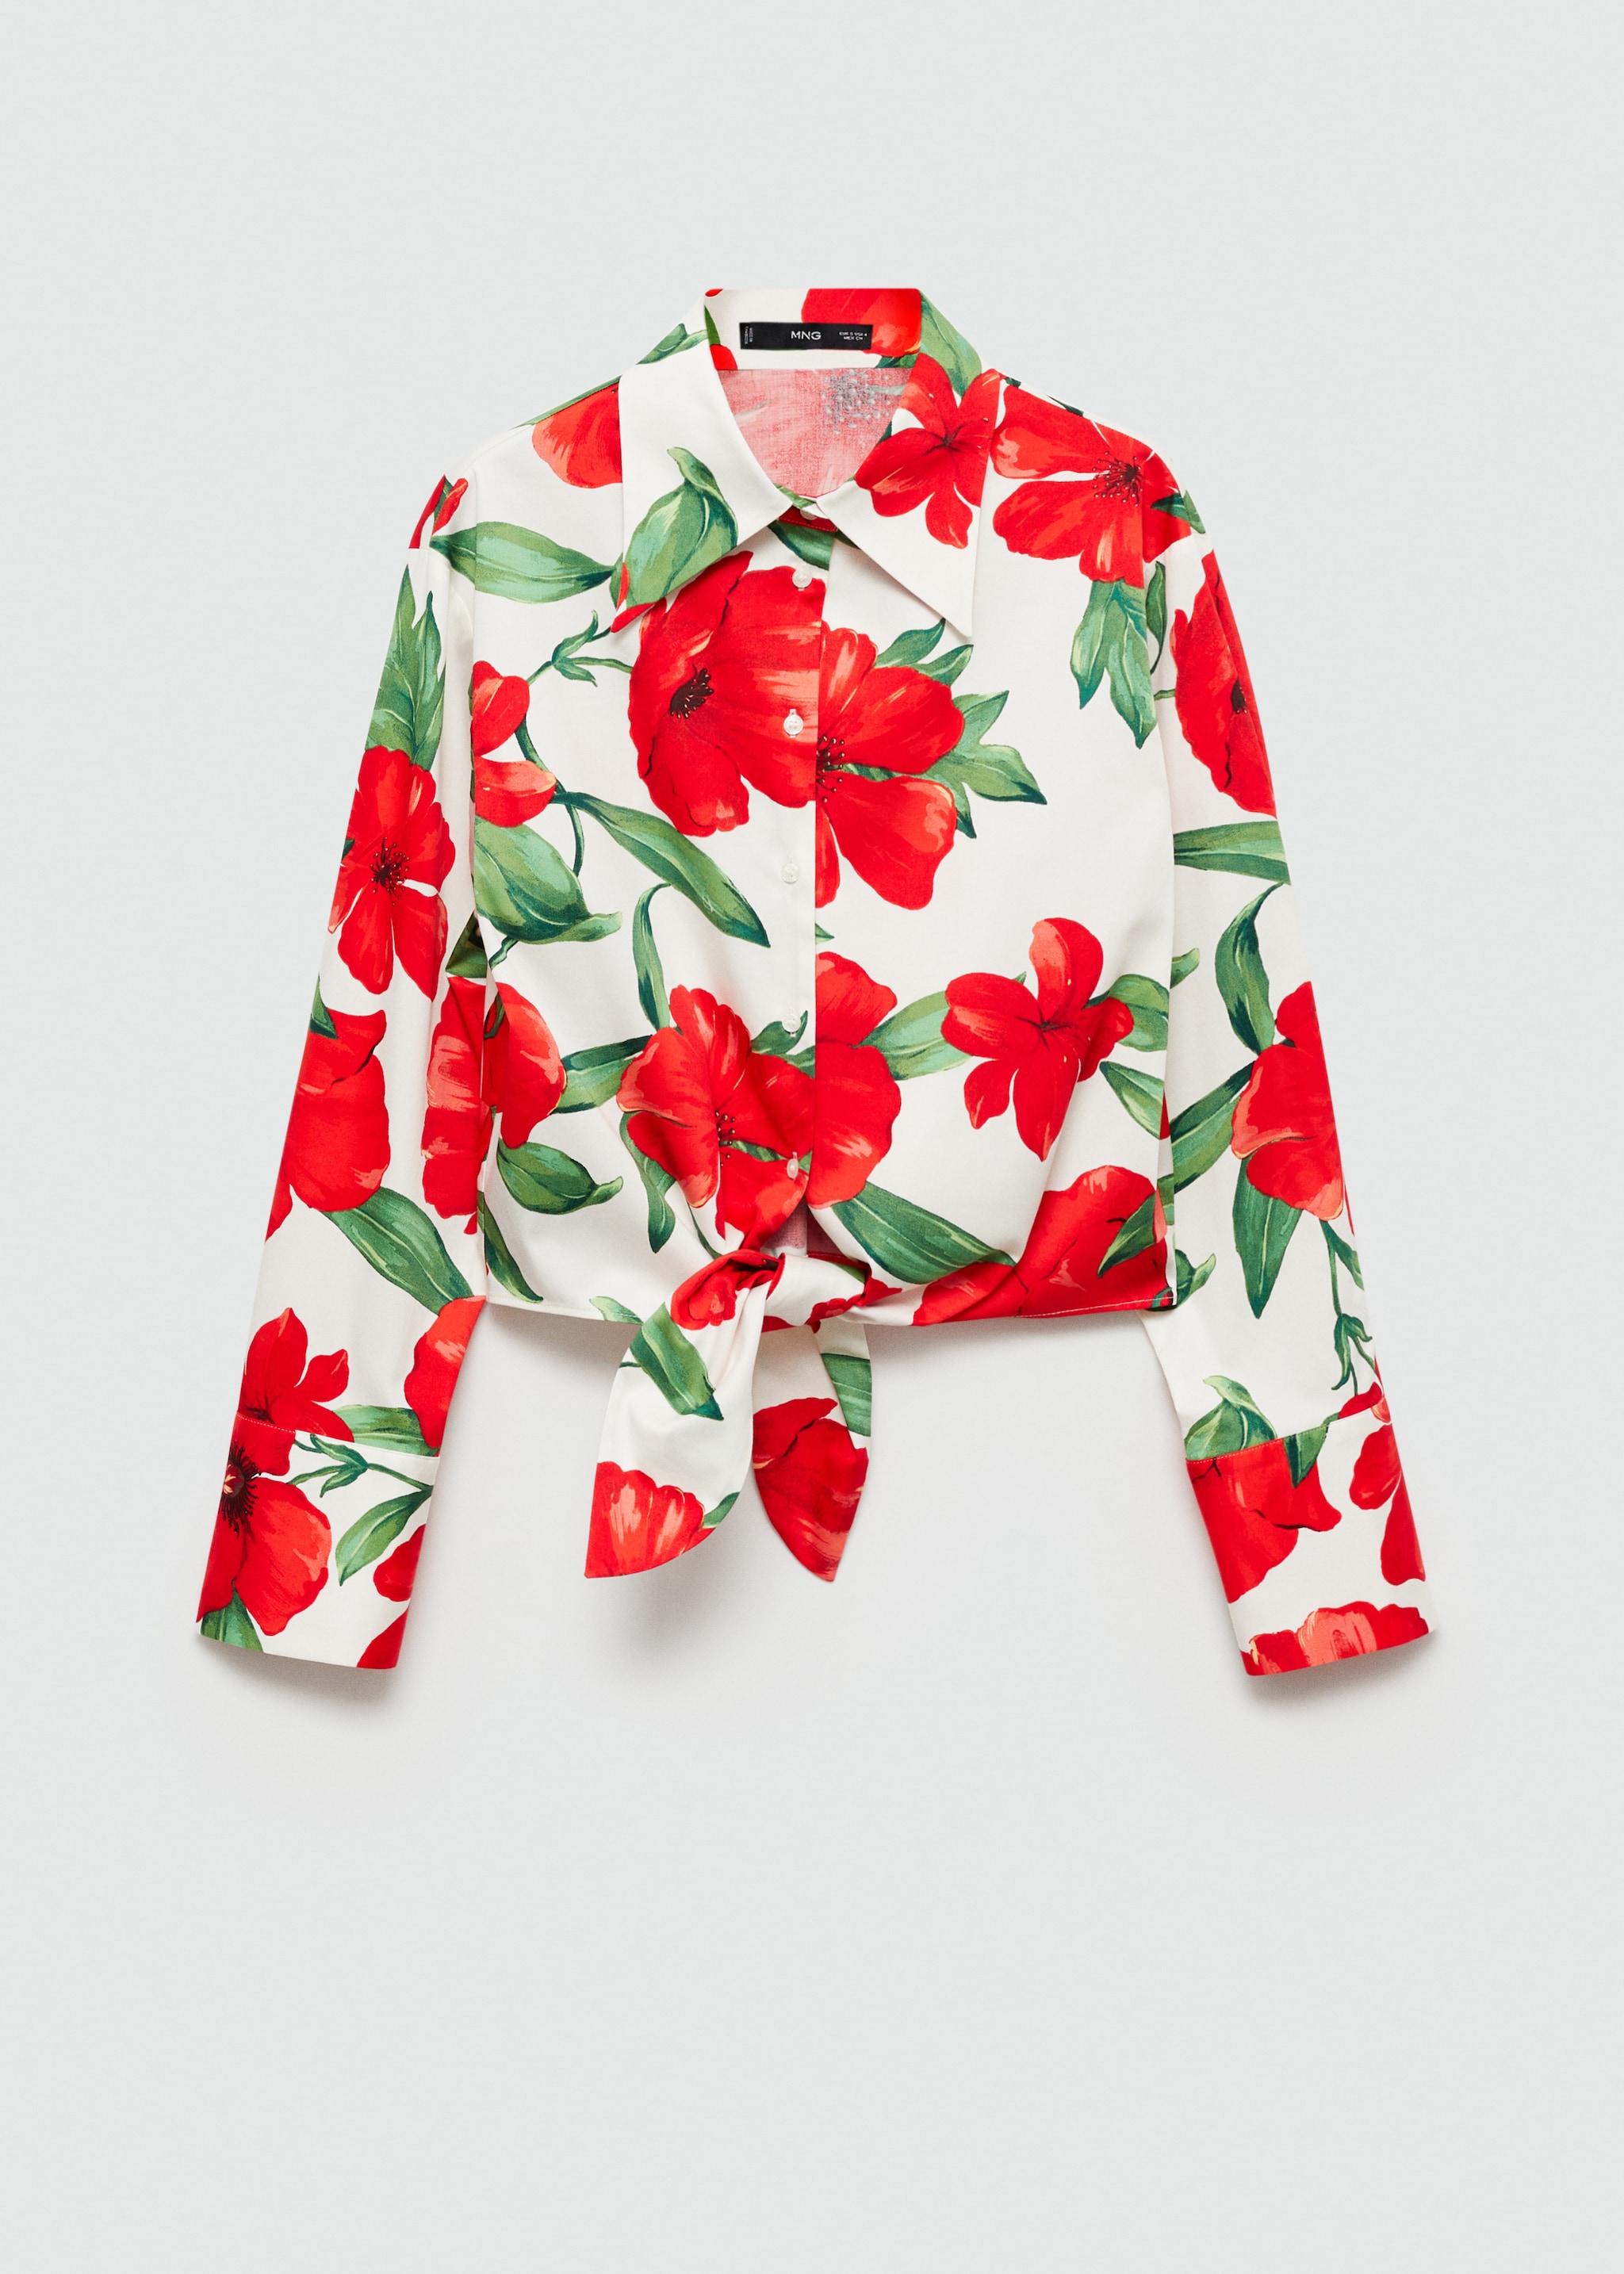 Bow printed shirt - Article without model